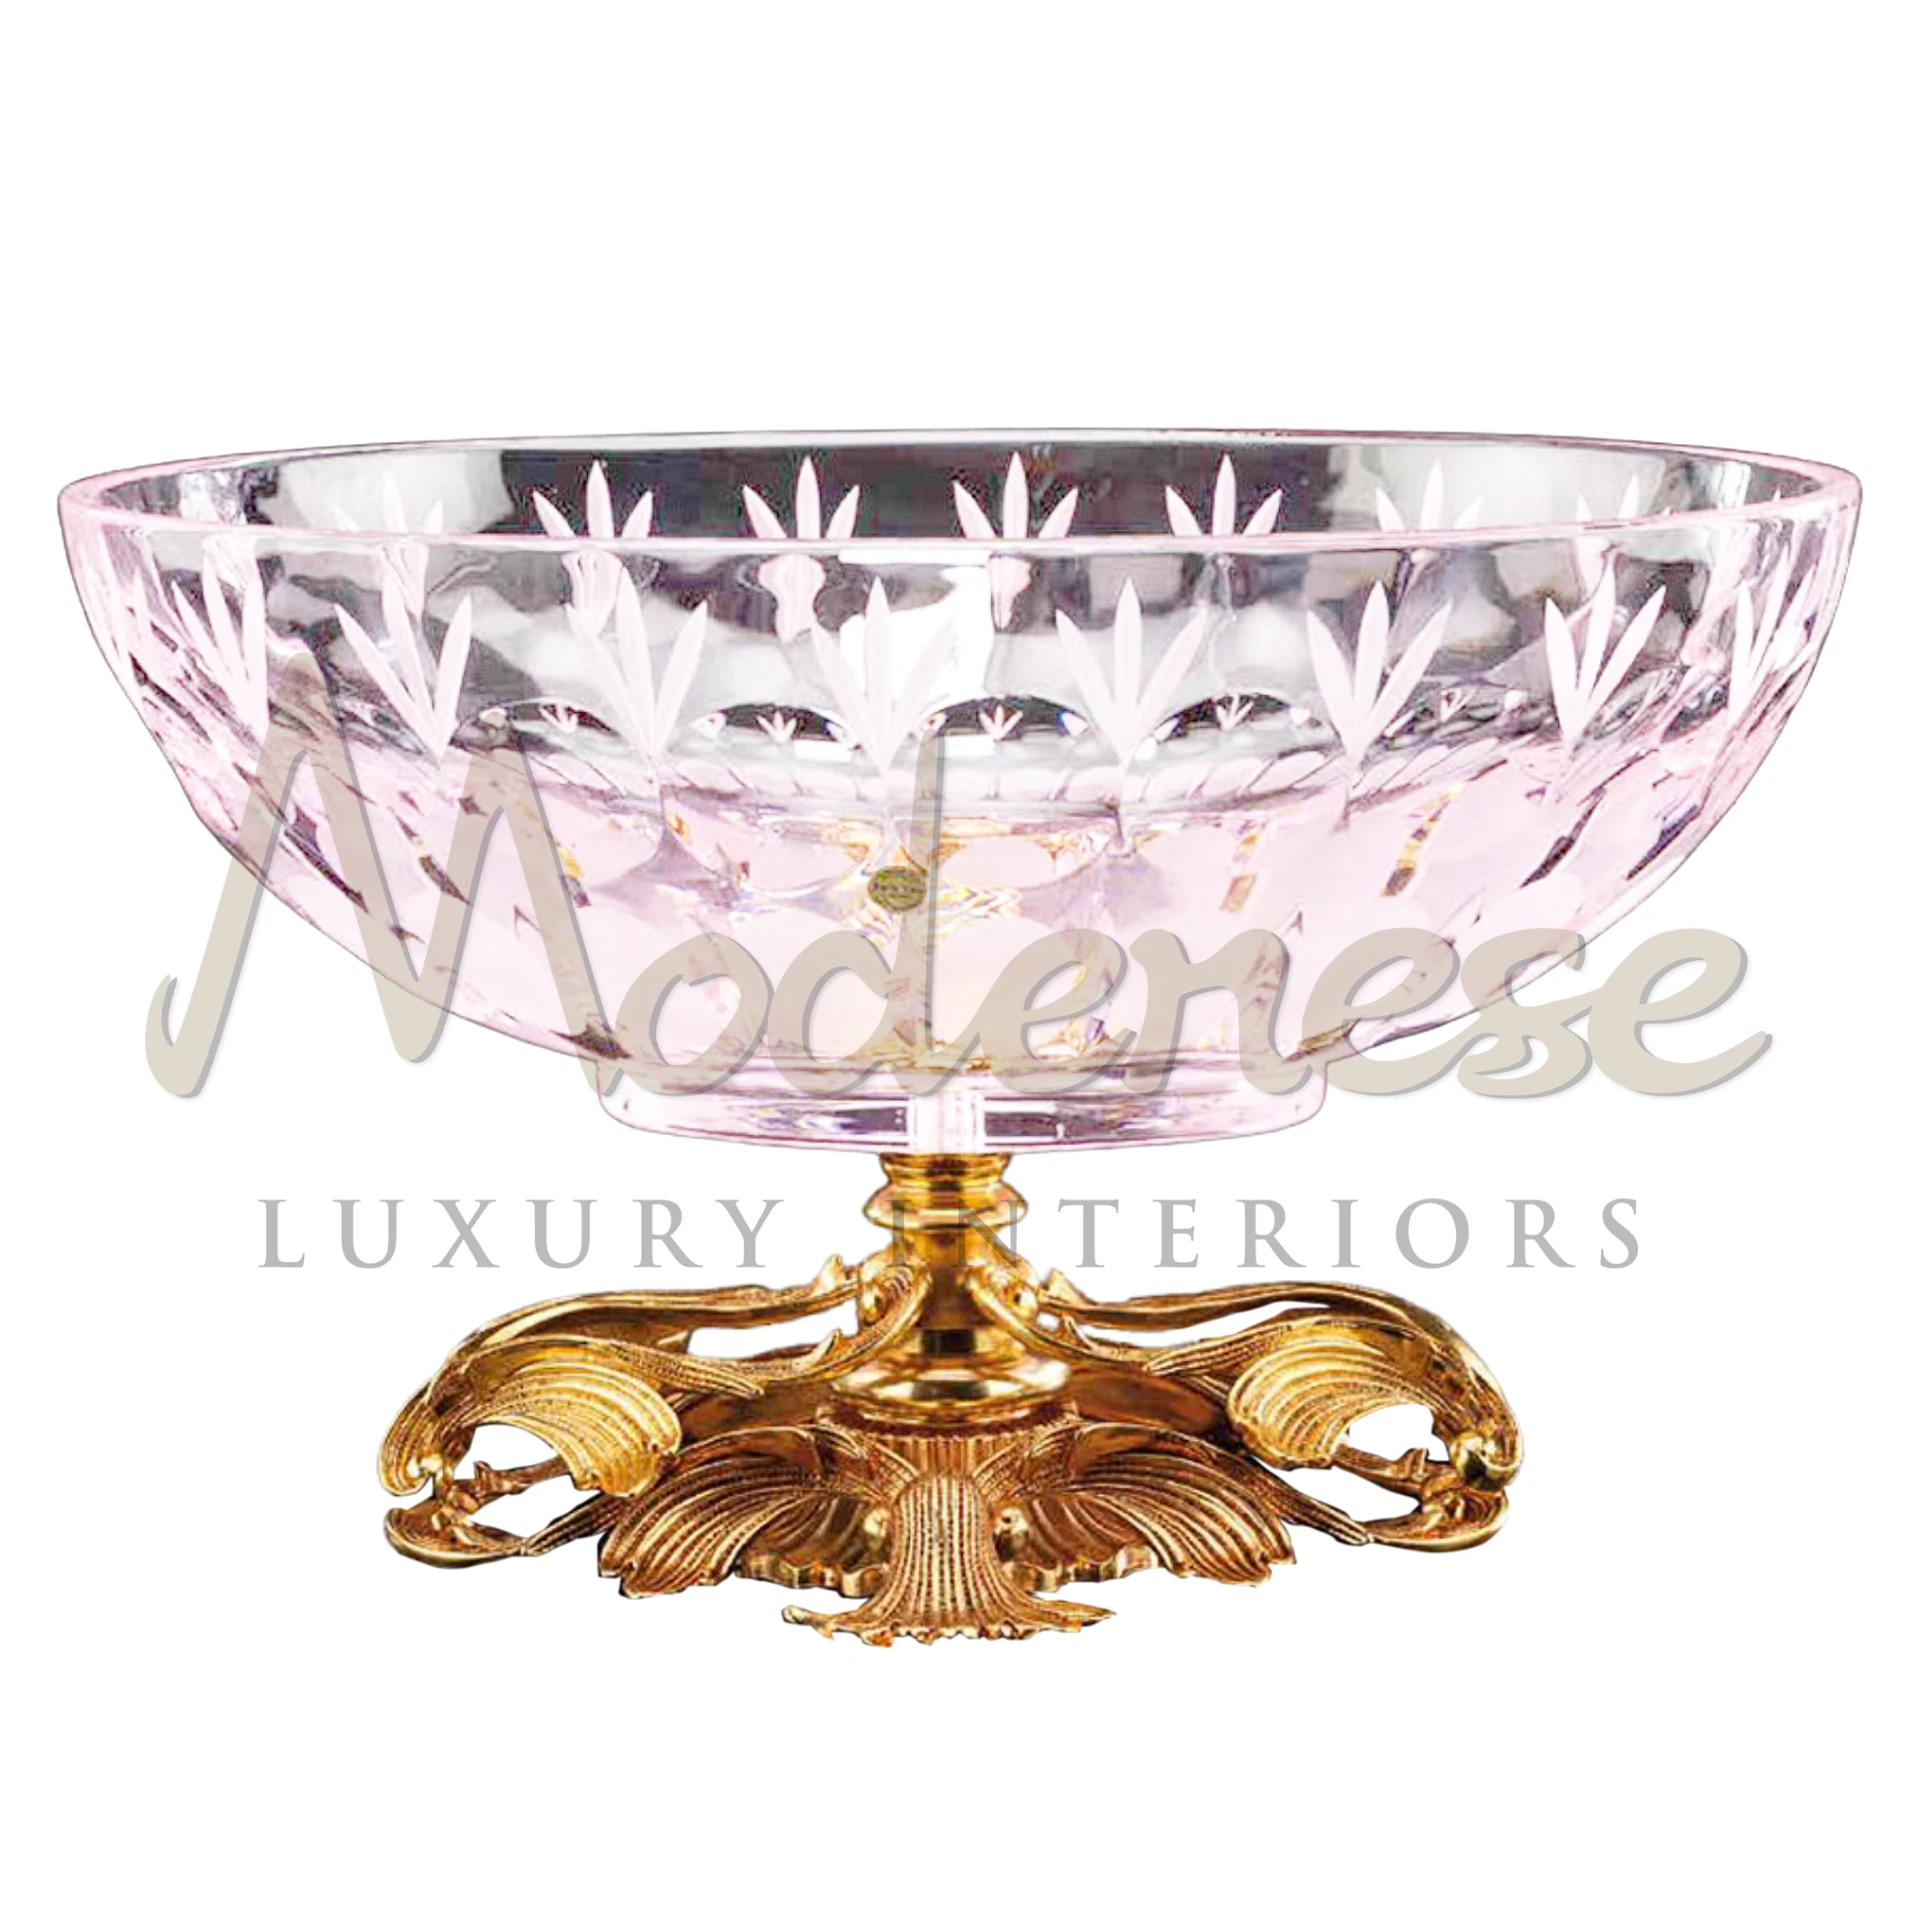 Imperial Pink Bowl, a sophisticated glass piece with regal design and ornate details, enhancing the luxury and elegance of classic and baroque interiors.